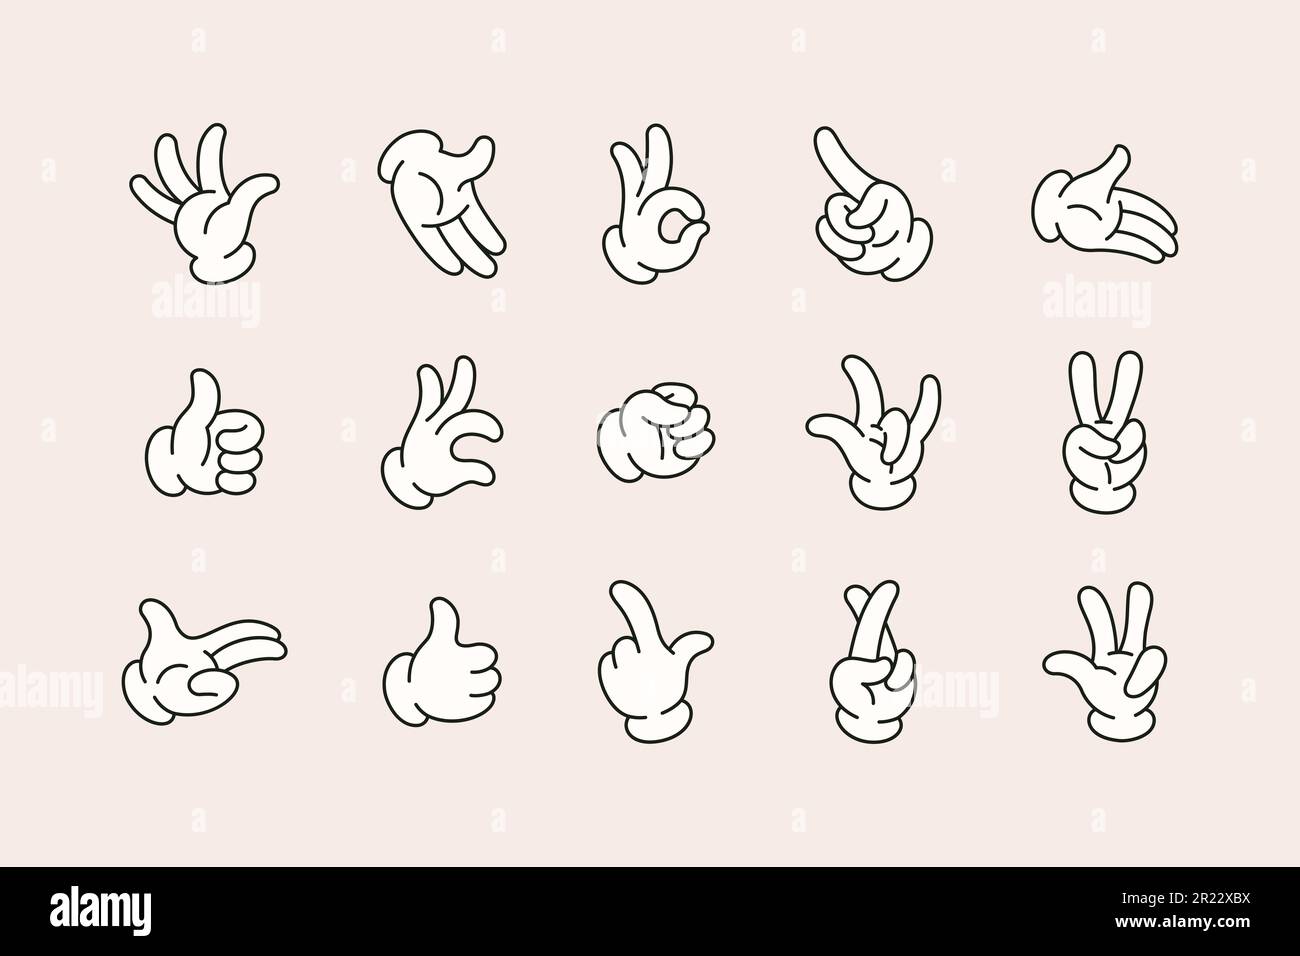 Retro Cartoon Hands Set in Different Gestures Showing Ok Sign, Pointing Fingers, Thumb Up, Rock sign, High Five. Vector Comic Arms in Gloves in 1930 S Stock Vector